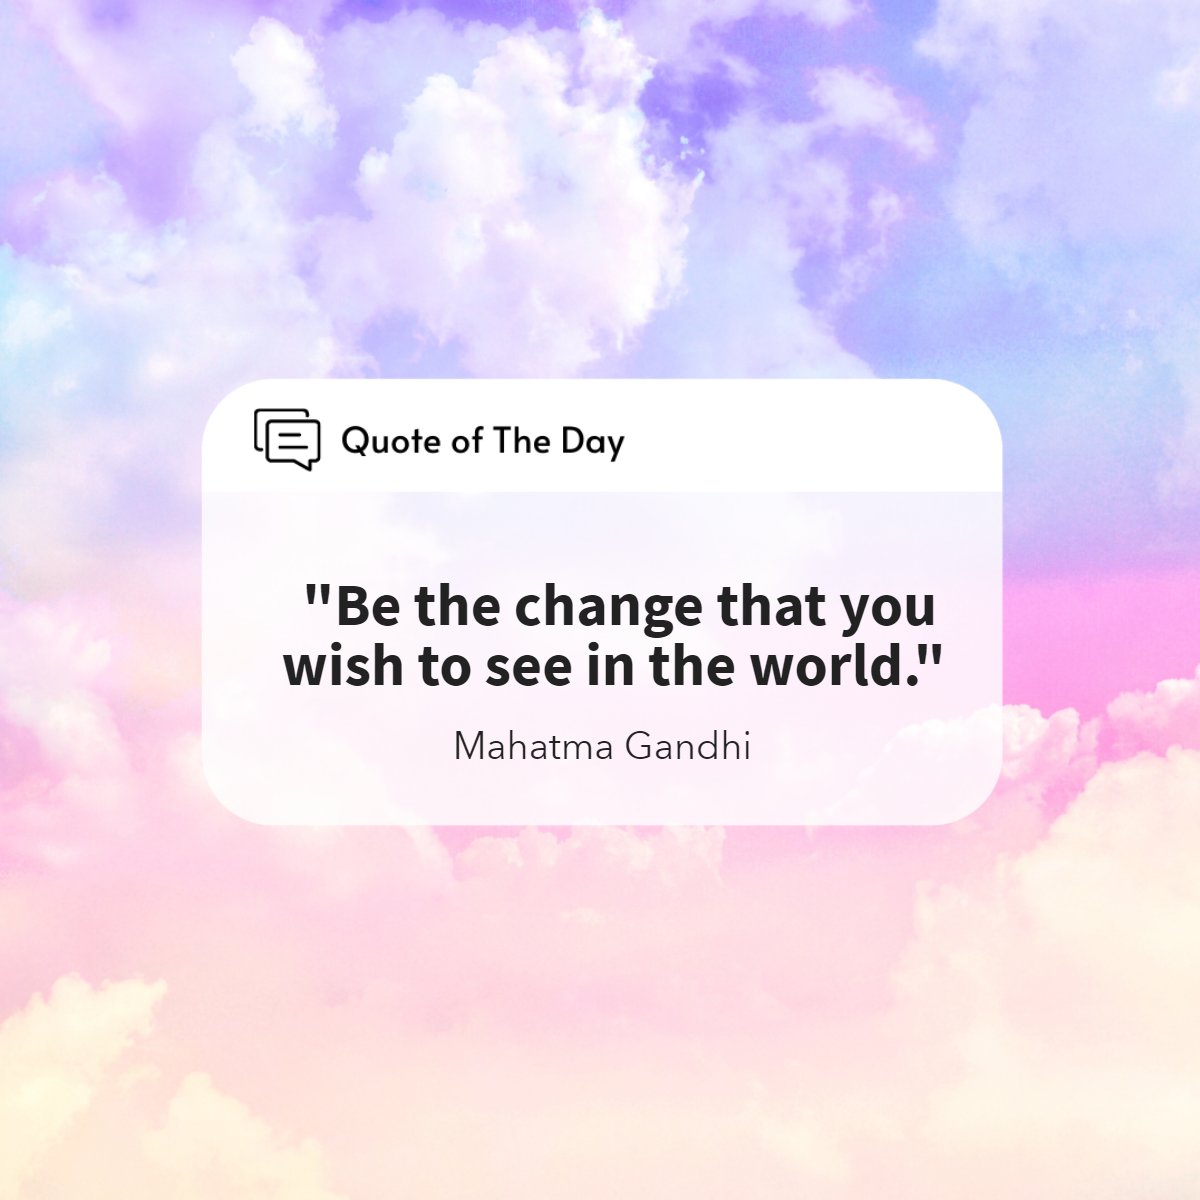 'Be the change that you wish to see in the world.' 
― Mahatma Gandhi

What's one small thing you can do to make the world a better place? 

#gandhi    #bethechange    #inspiringquote    #inspire    #inspiring
#premierrealestatenetwork #pren #realestate #realtor